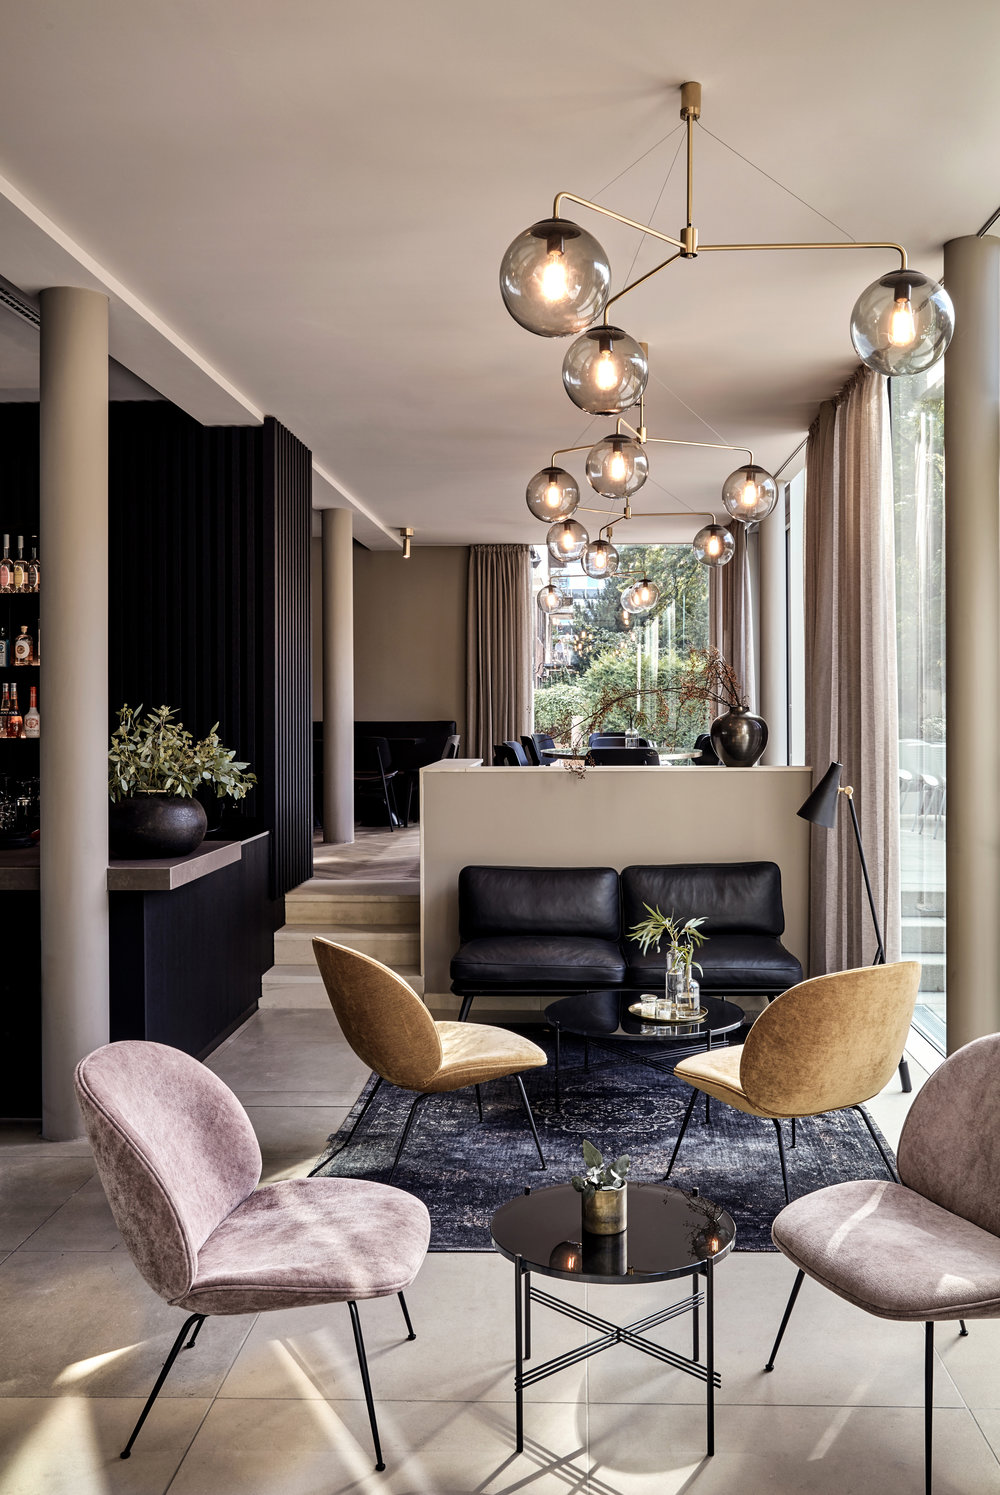 Gubi Lounge chairs at the Hotel Mauritzhof, Germany